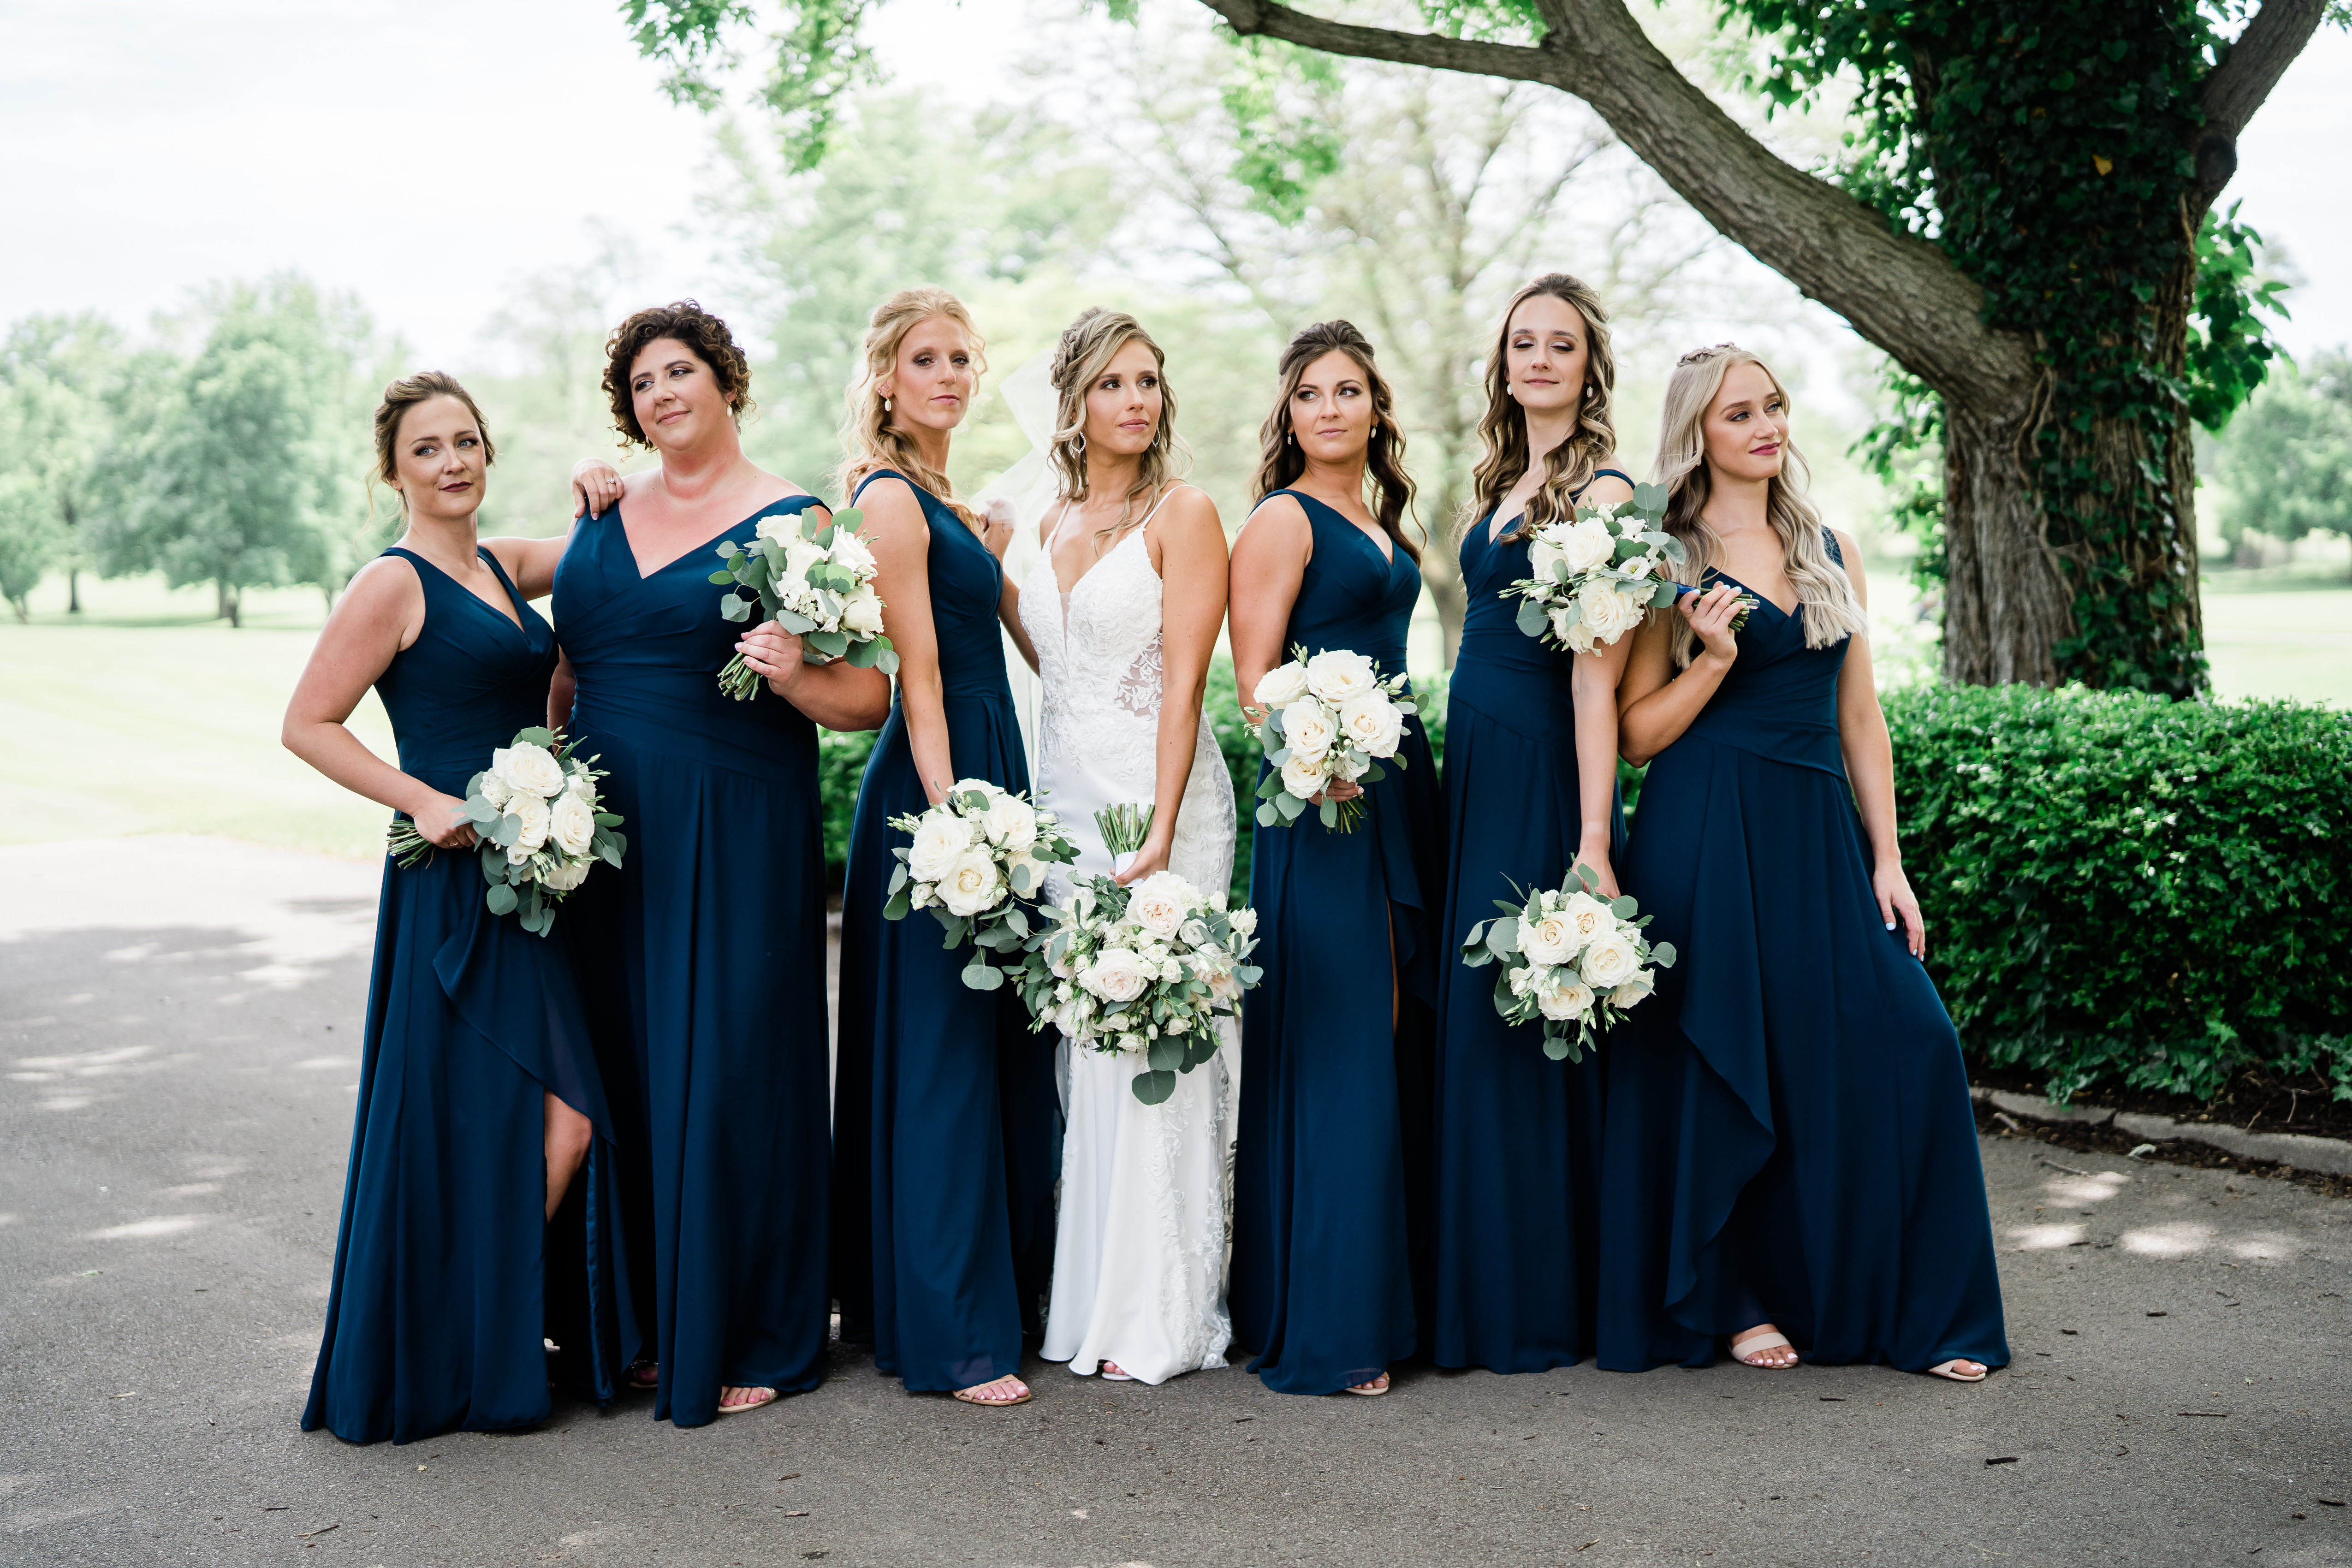 Fort Wayne wedding photographers capture bride with bridesmaids holding bouquets